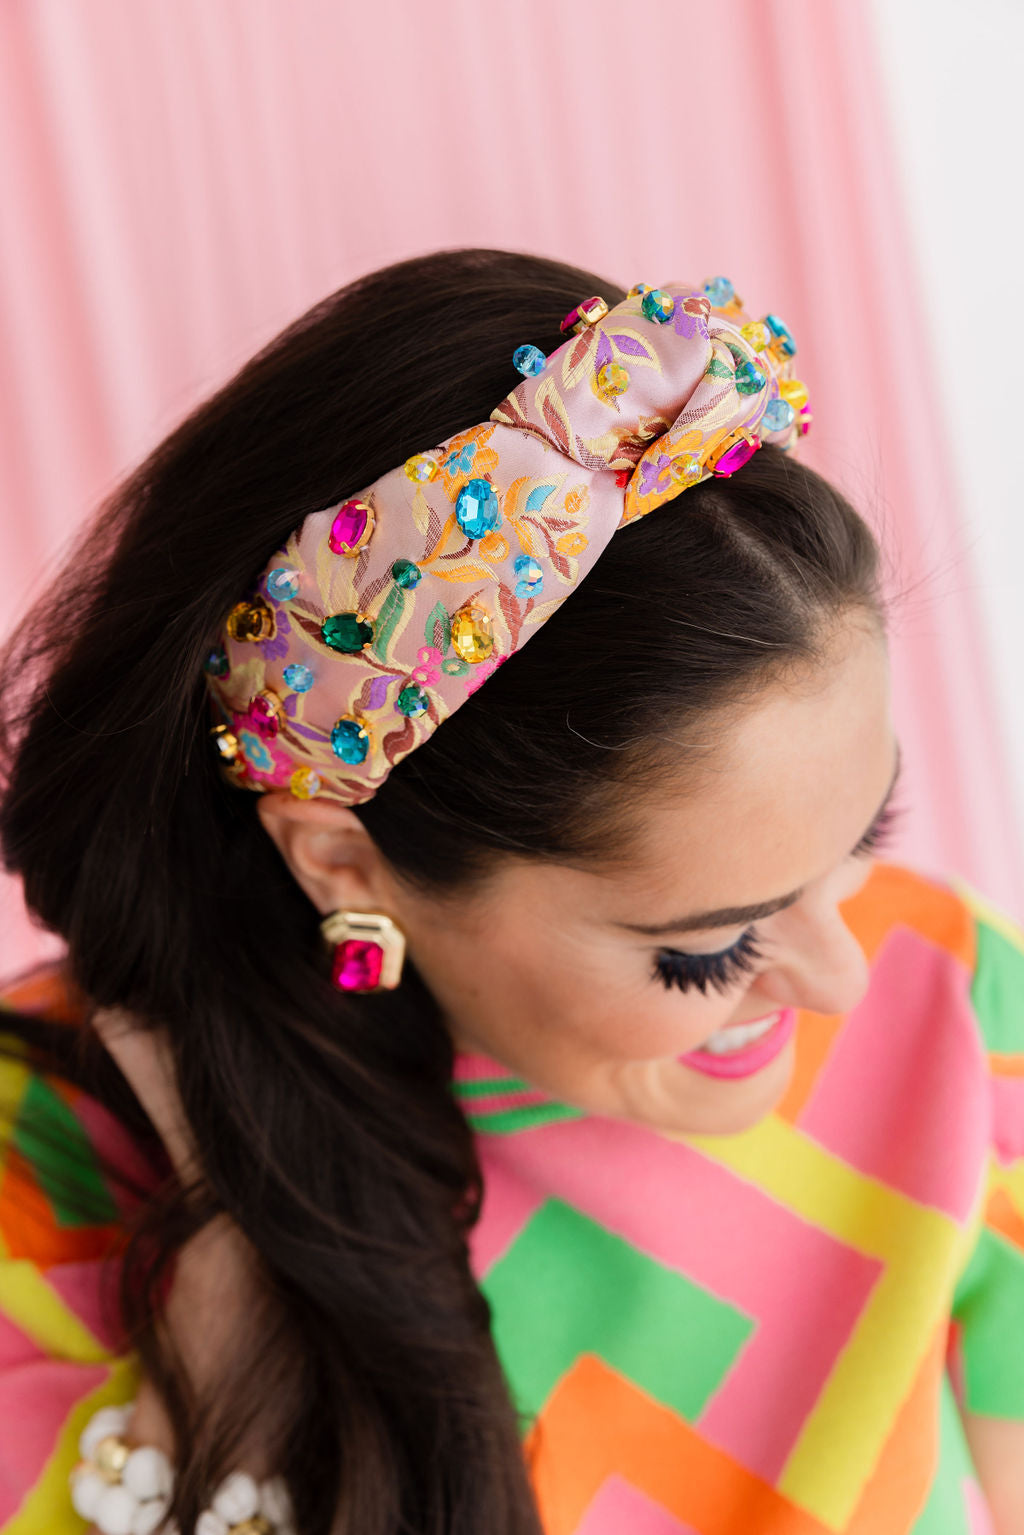 Adult Size Colorful Floral Brocade Headband with Crystals